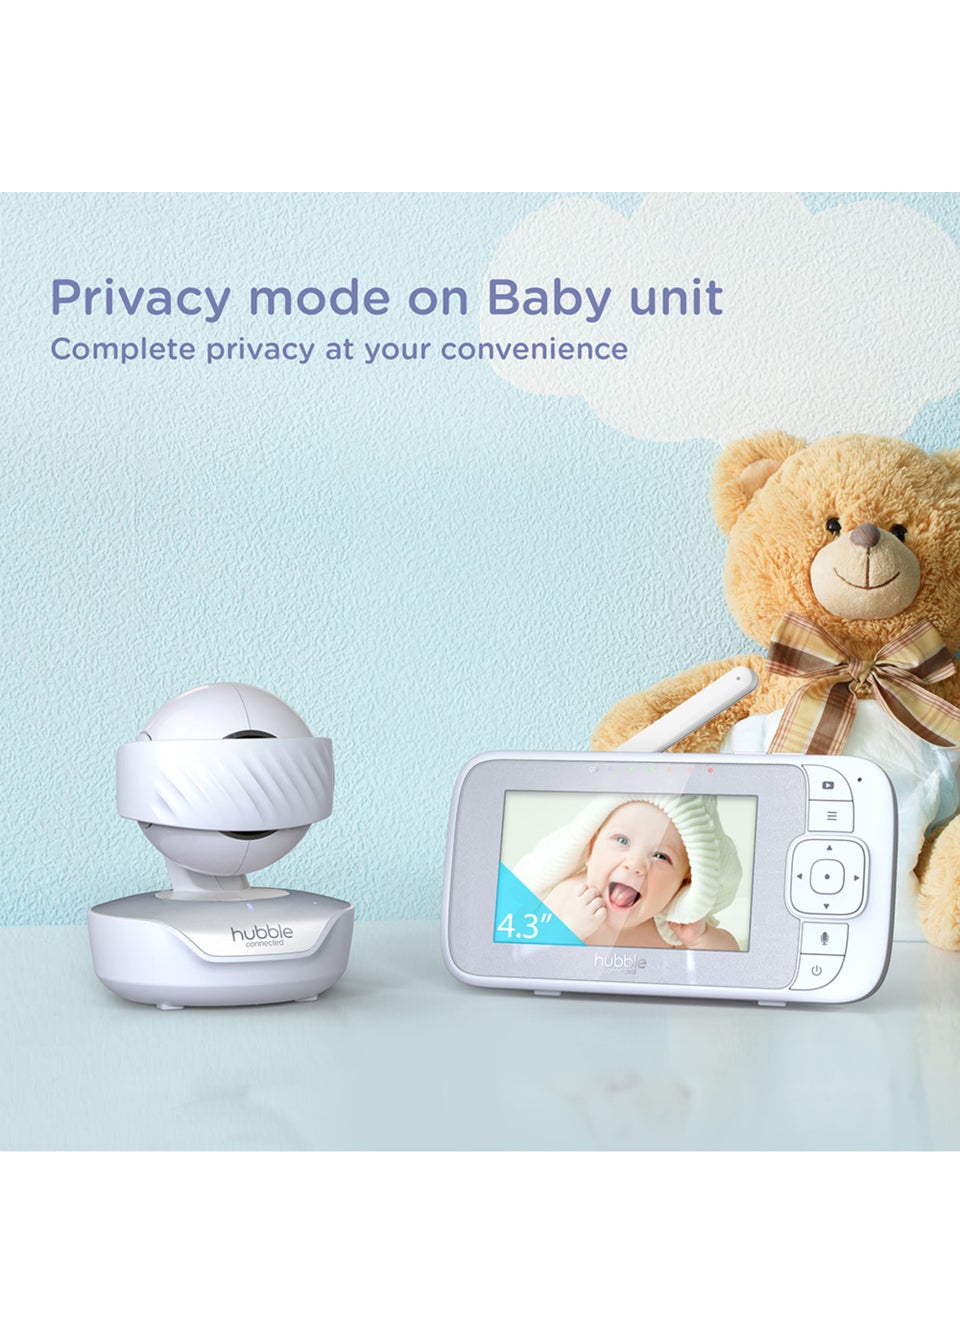 Hubble Nursery View Select Baby Monitor